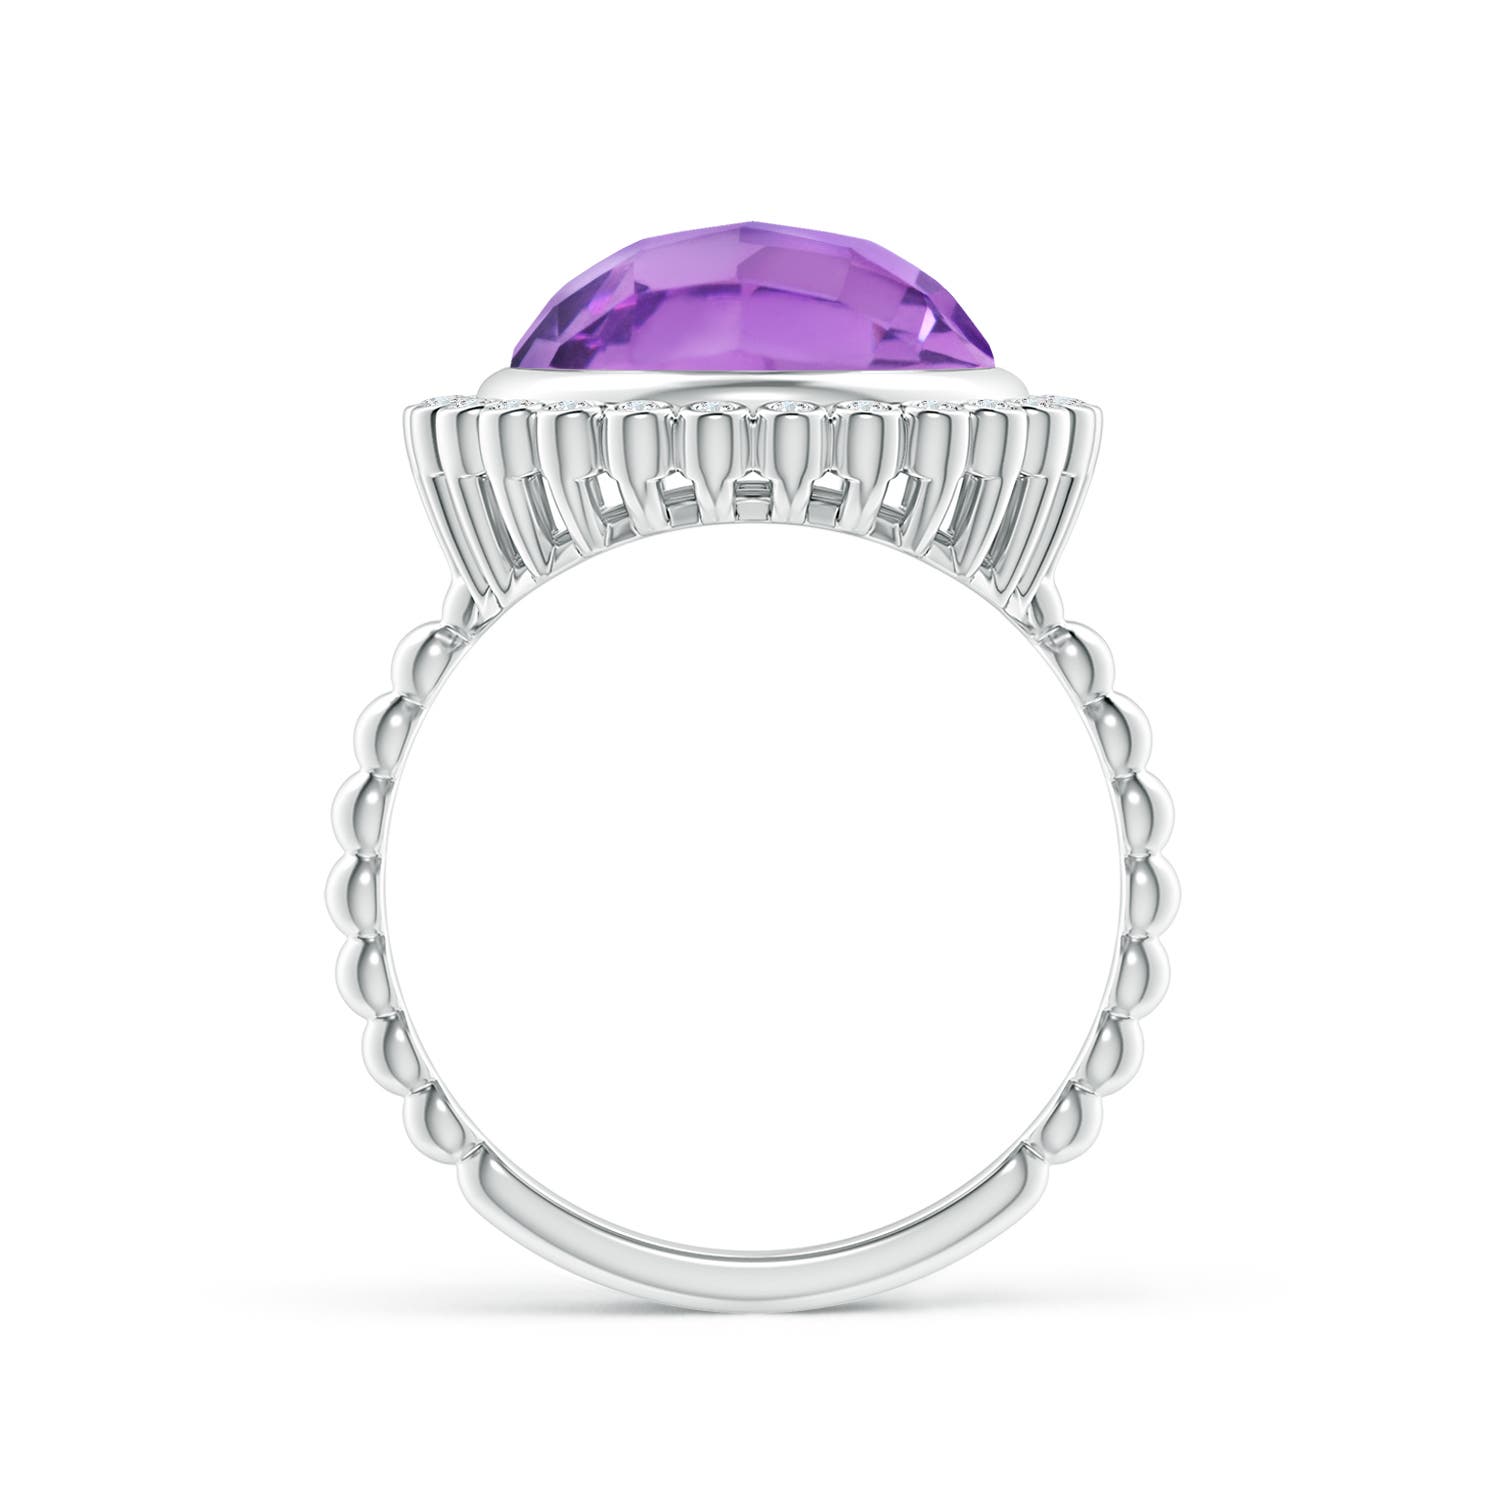 A - Amethyst / 5.01 CT / 14 KT White Gold